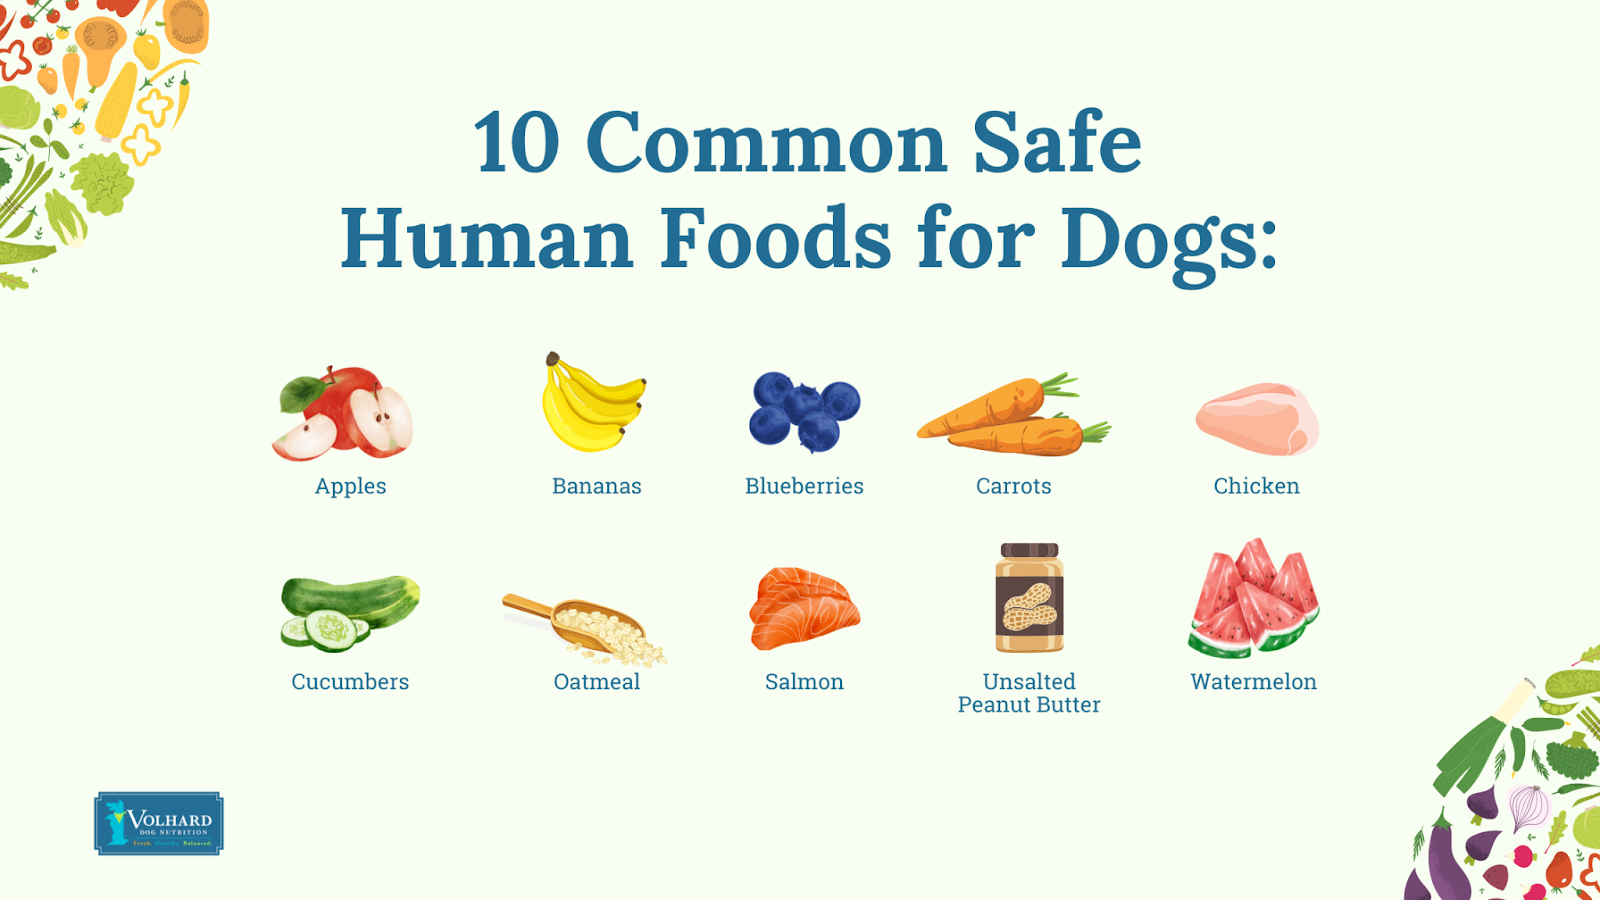 10 common safe human foods for dogs